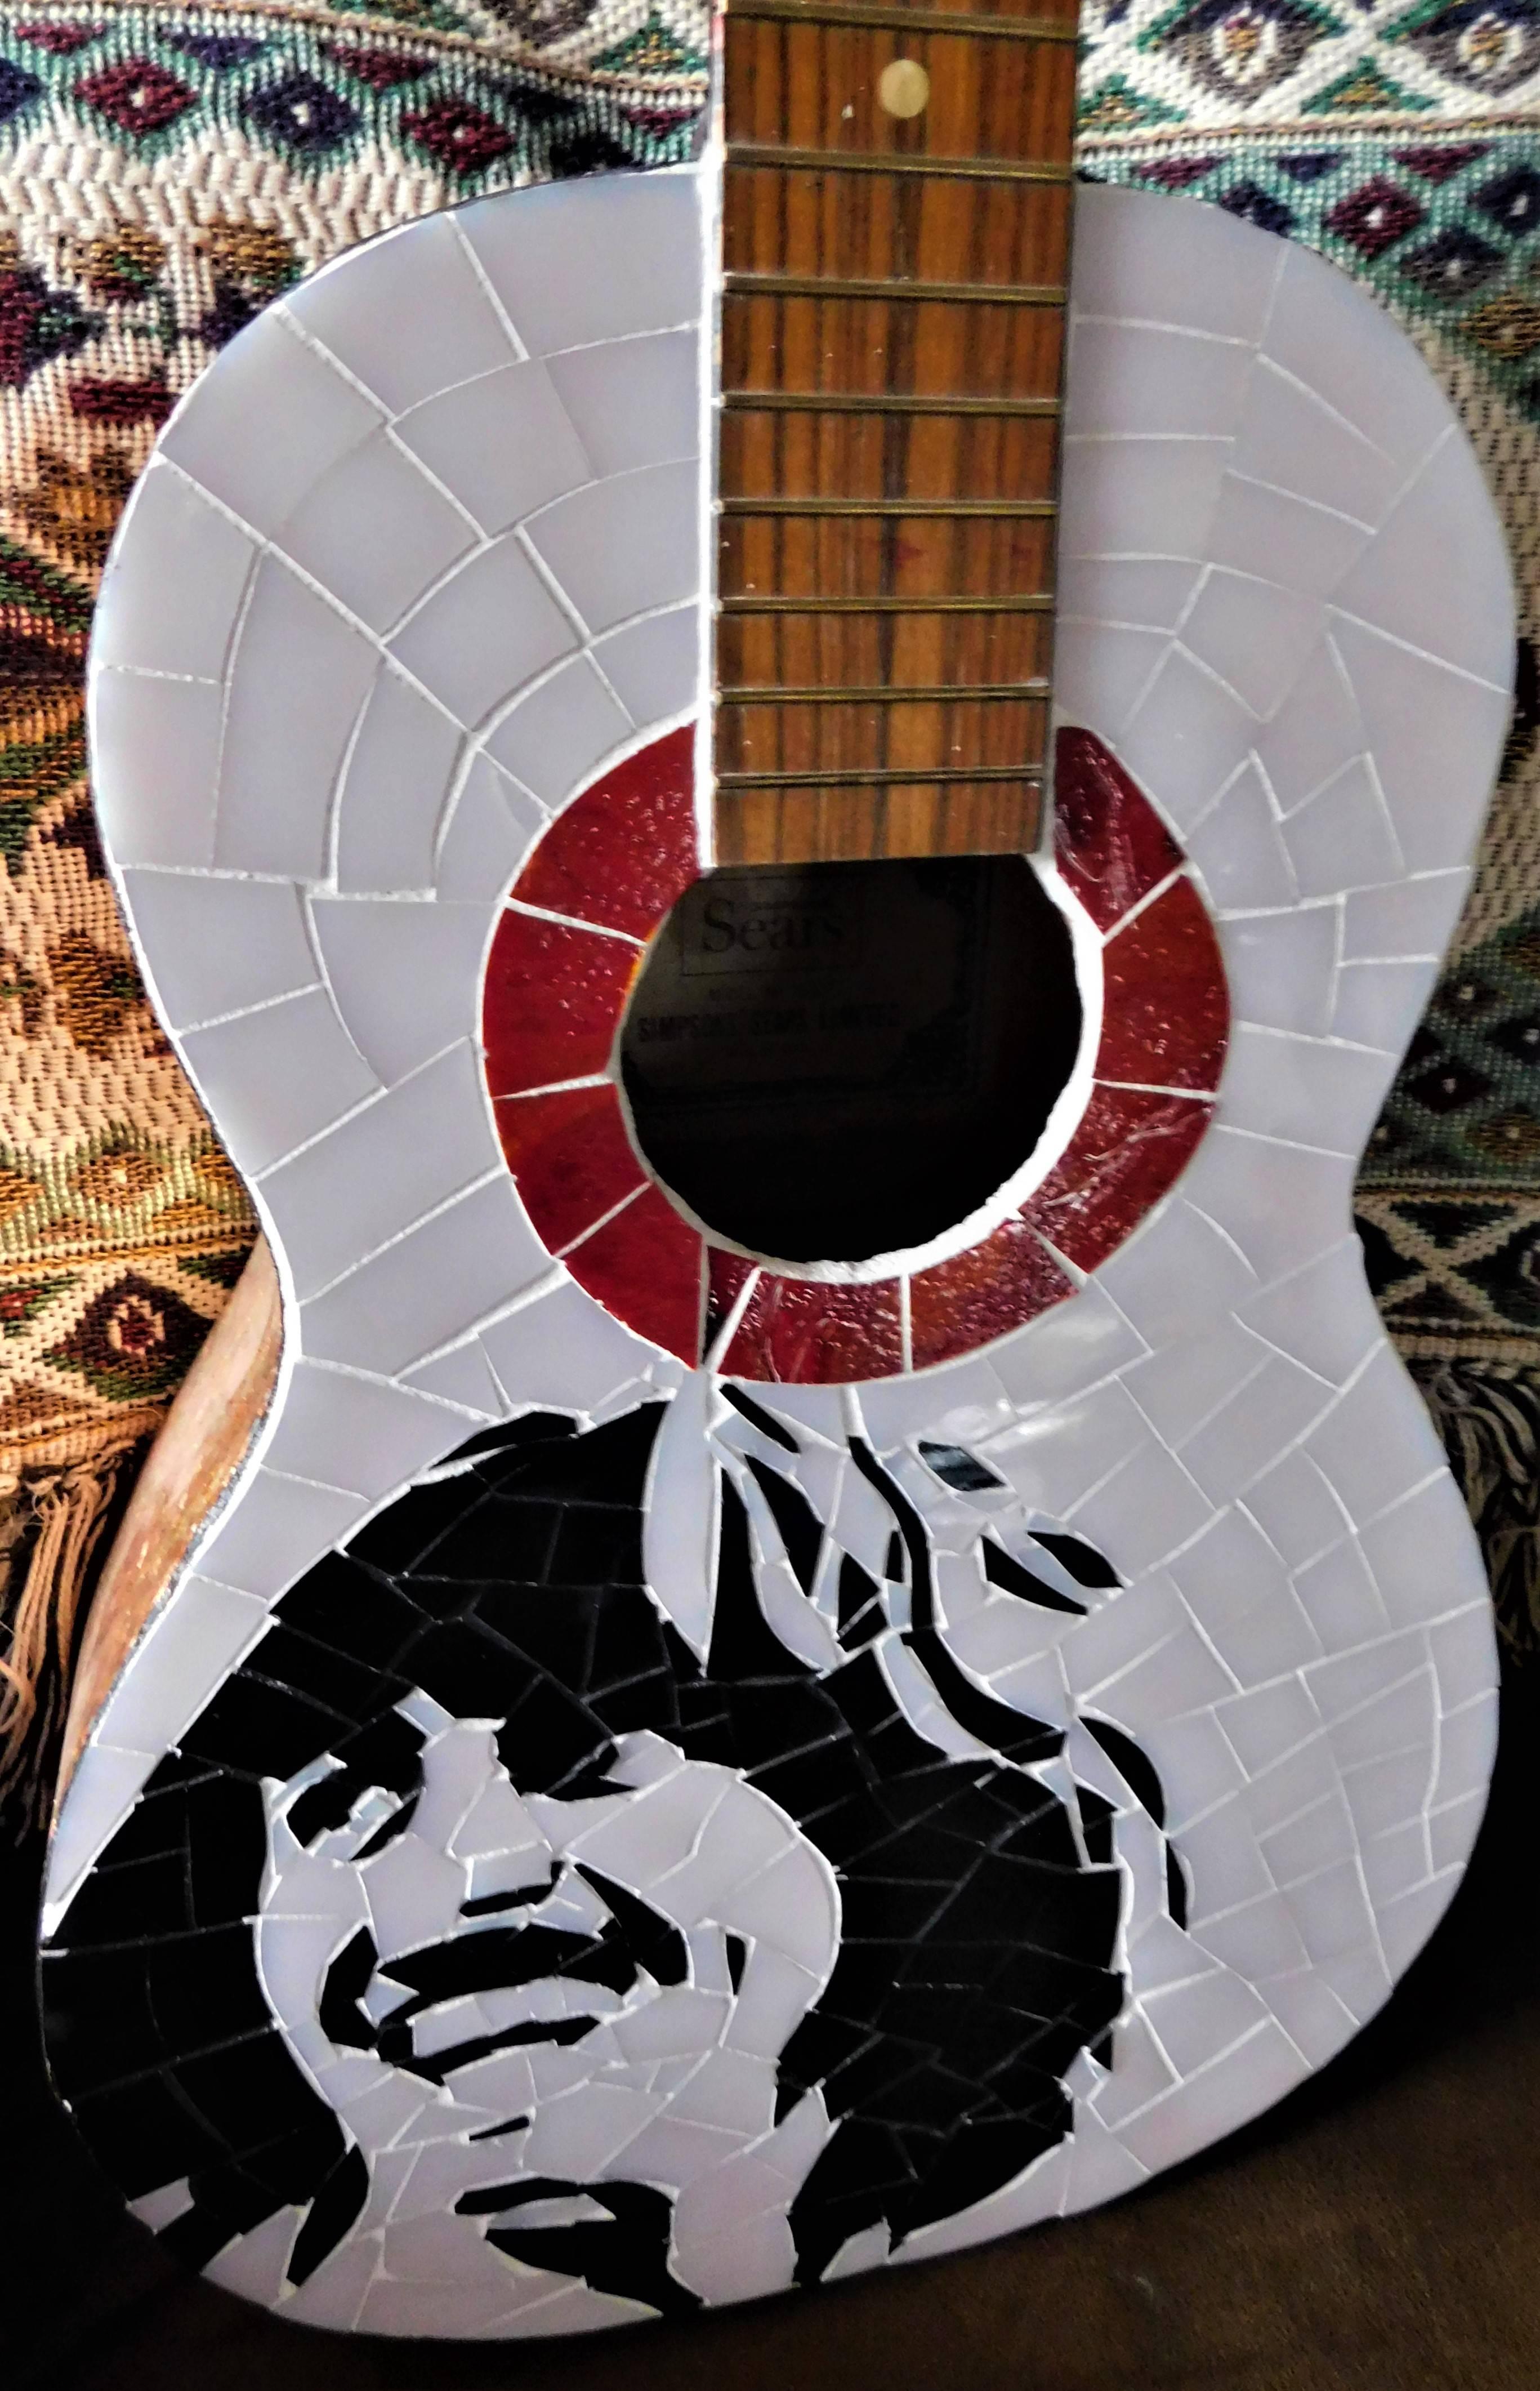 This George Harrison stained glass acoustic guitar was created by Brantford, Ontario, Canada artist Lily Crawford in 2012 and signed on the back. The sides are covered with gold leaf. The guitar was made for Simpson Sears, made in Japan. The image